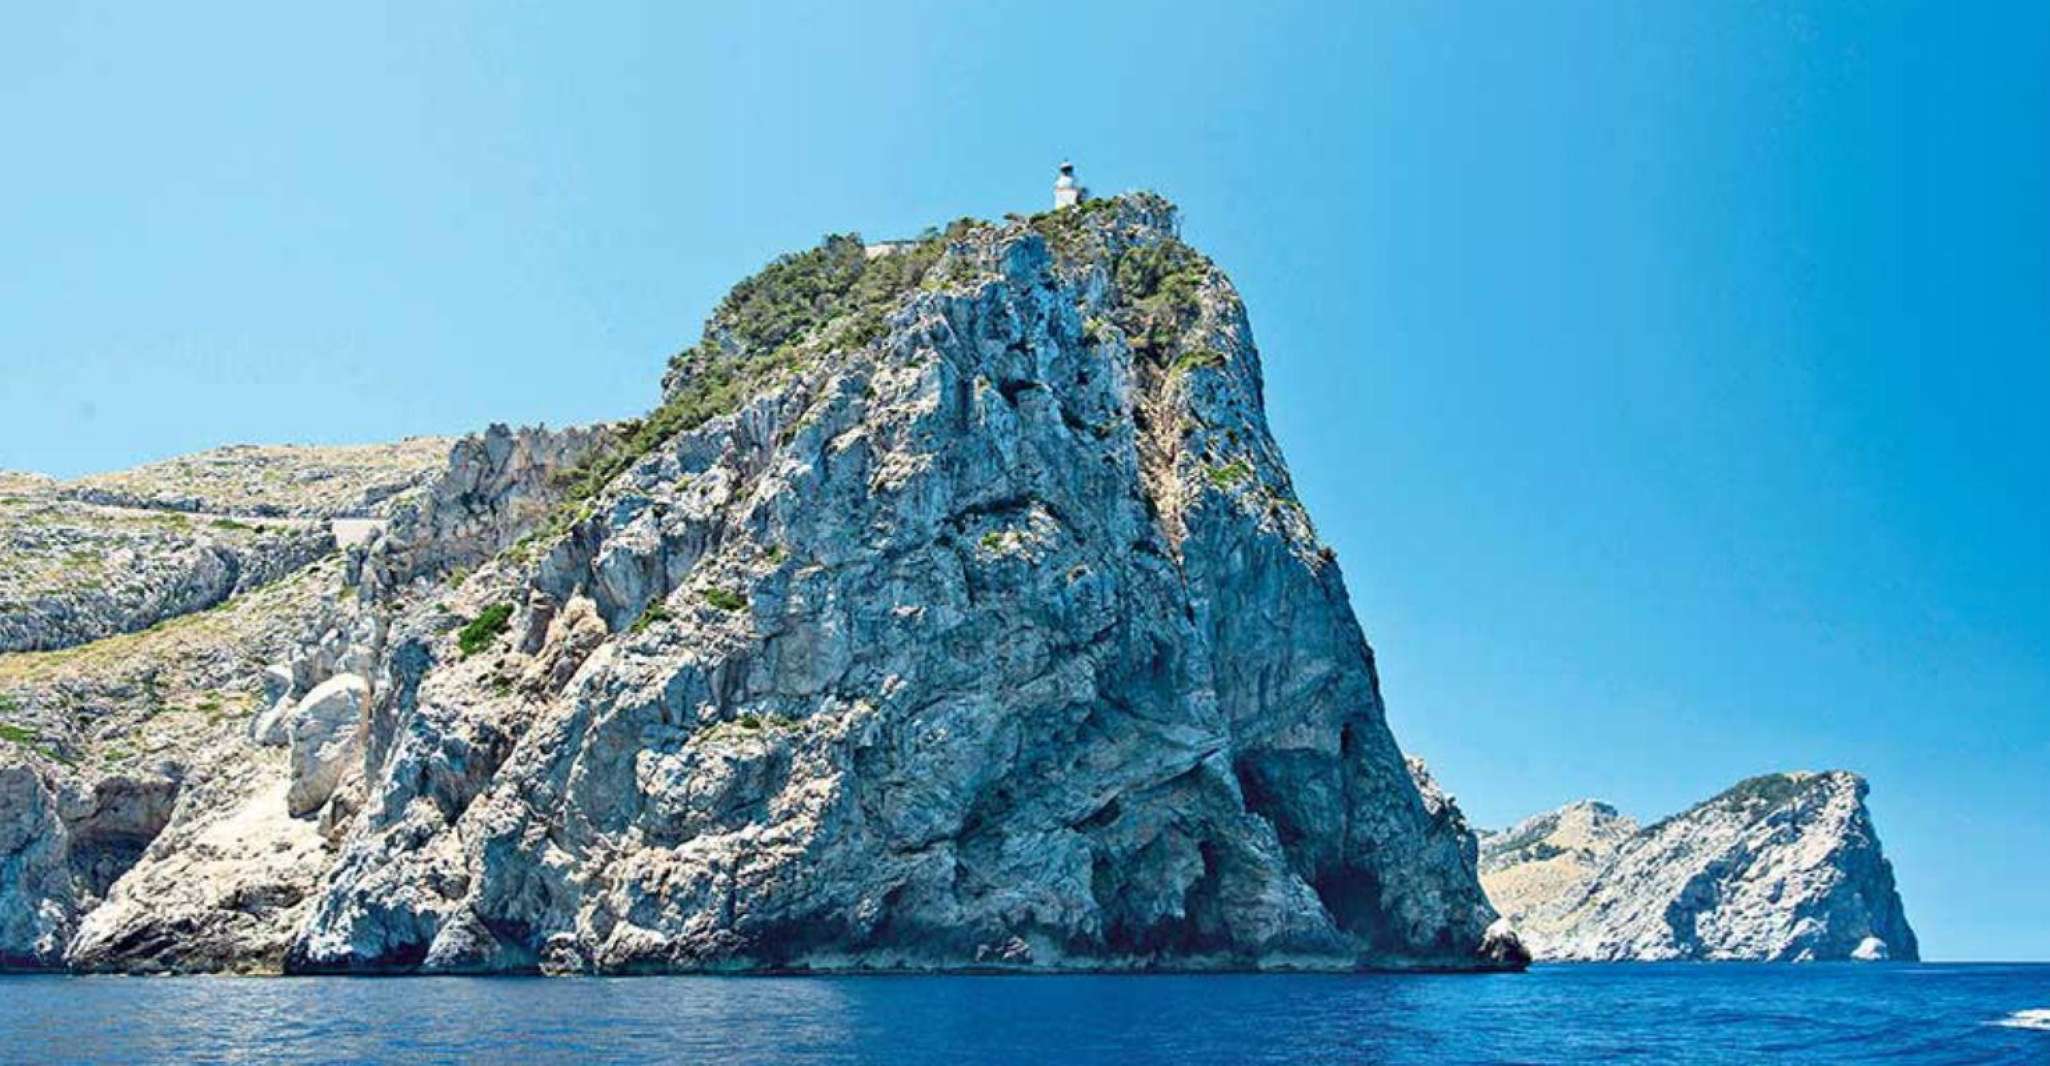 Alcudia, Boat Trip to Cap de Formentor and Formentor - Housity